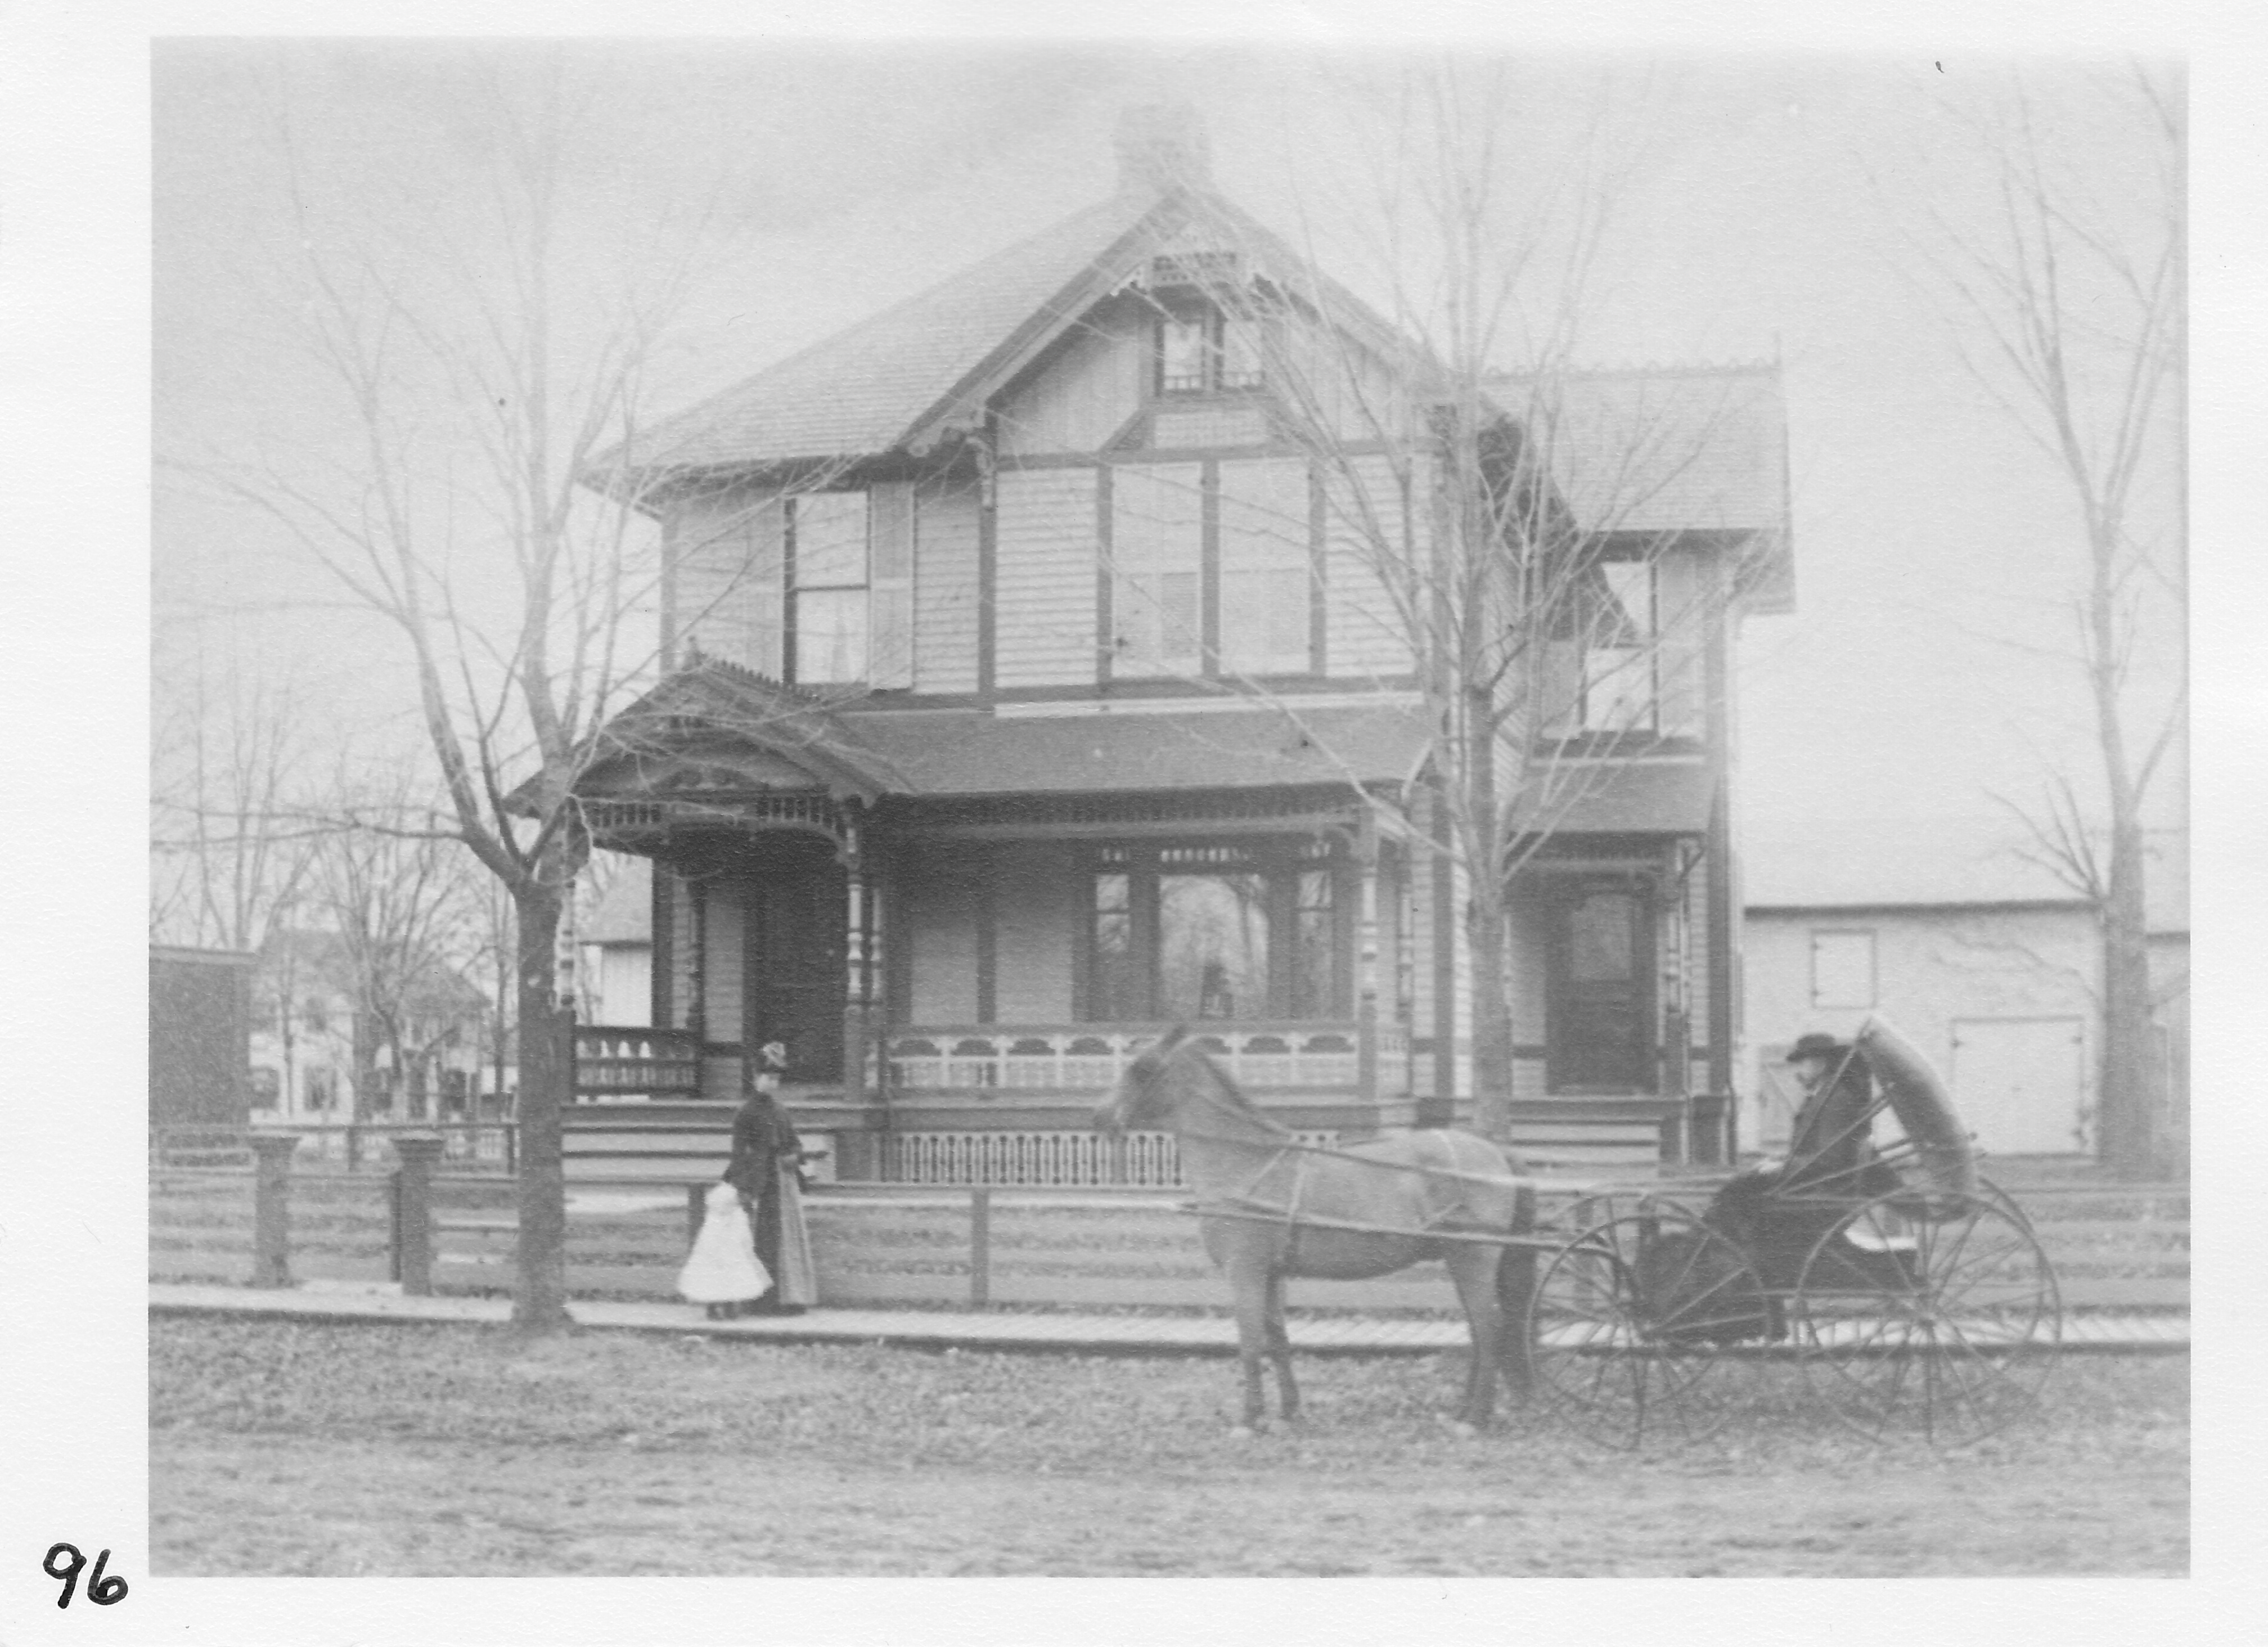 W. W. Crabbs residence at 120 N. Summit Street.  Mrs. Crabbs and daughter Hazel.  Mr. Crabbs in buggy.